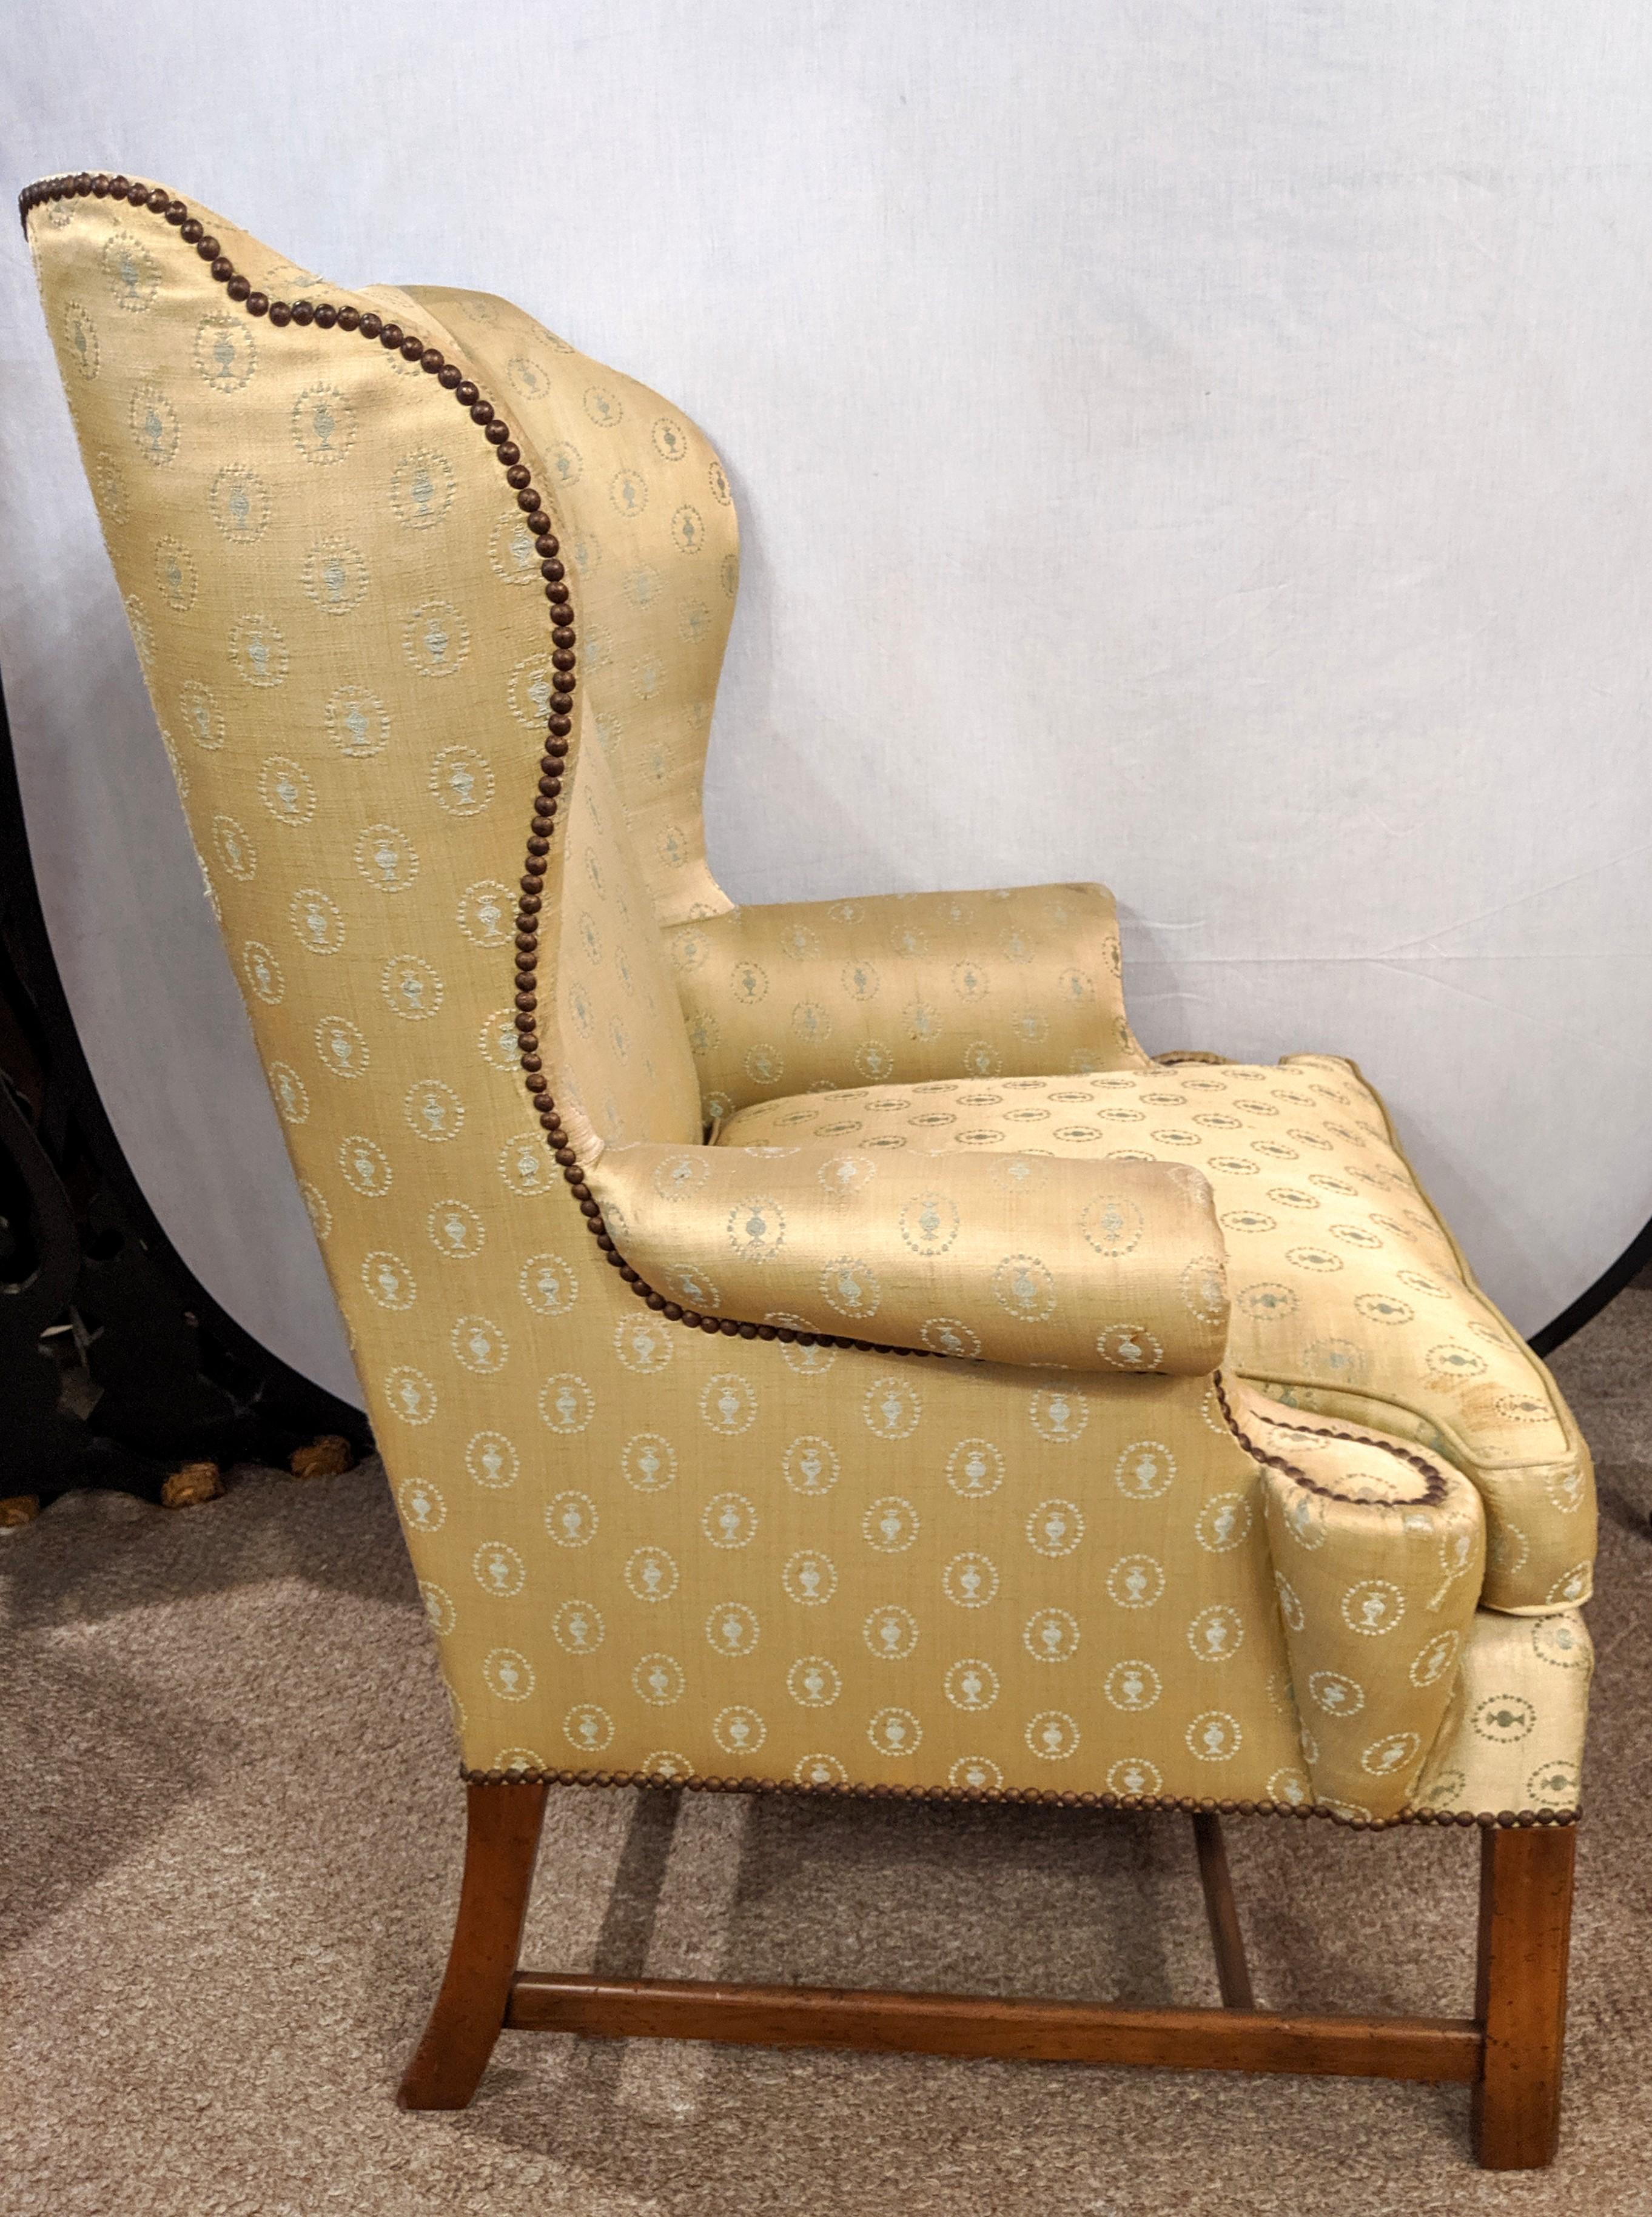  Baker Furniture Company Chippendale Wingback or Desk Chair in a Fine Fabric  1